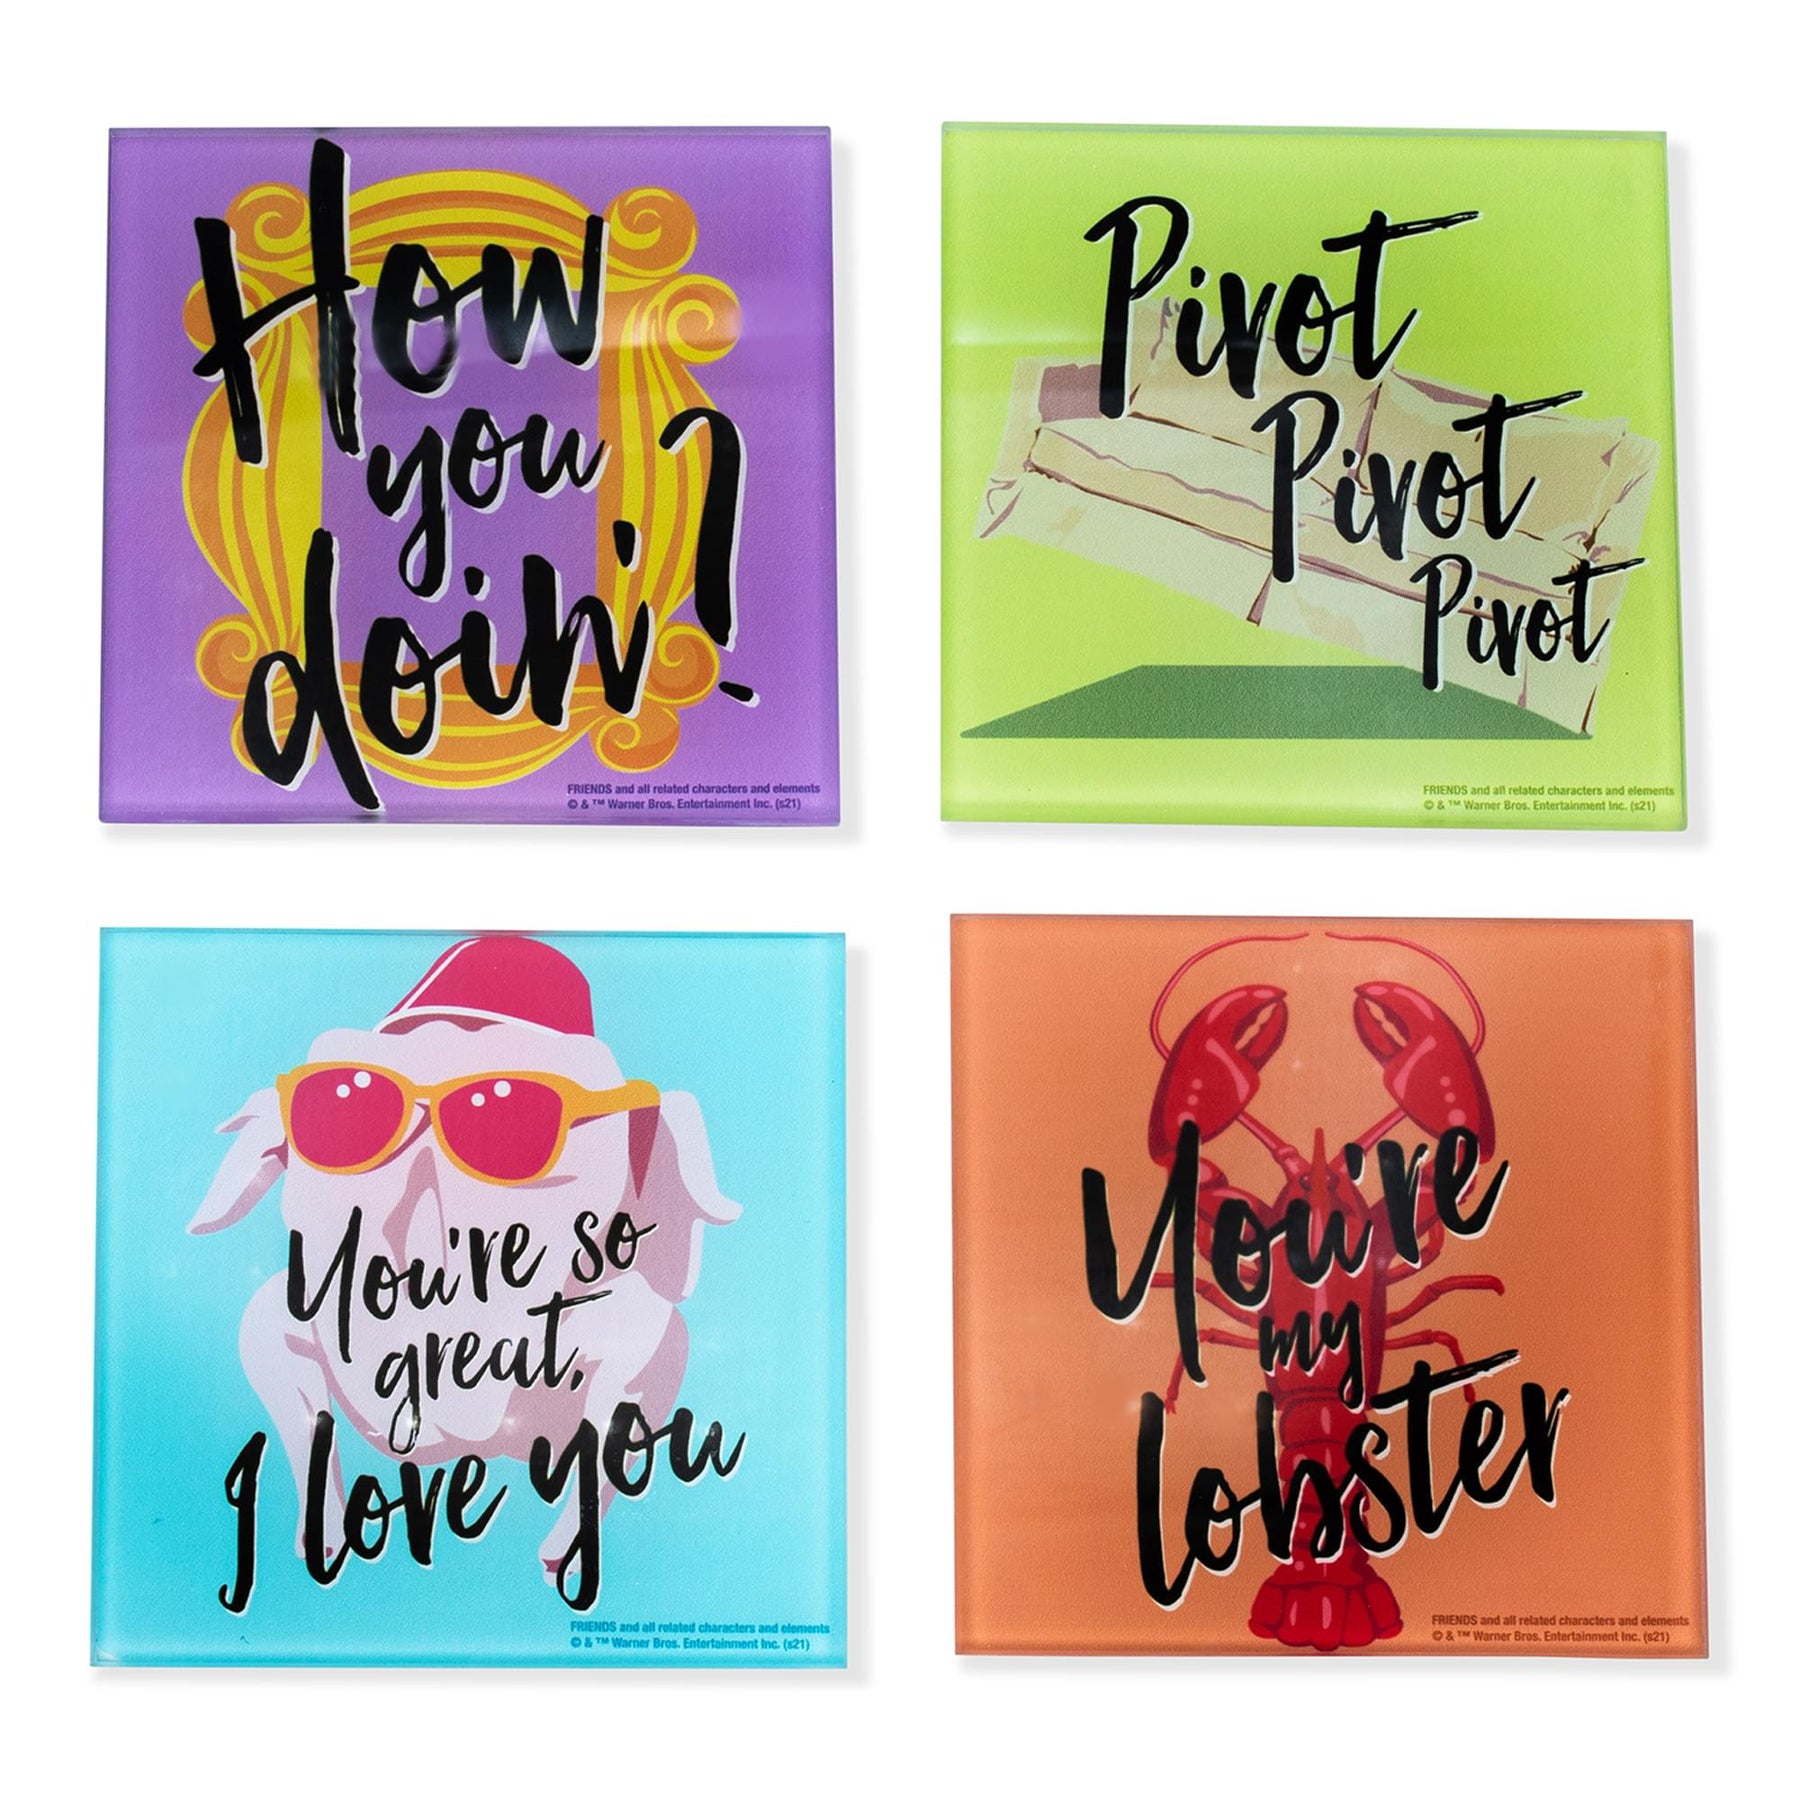 Friends Quotes Glass Coasters | Set of 4